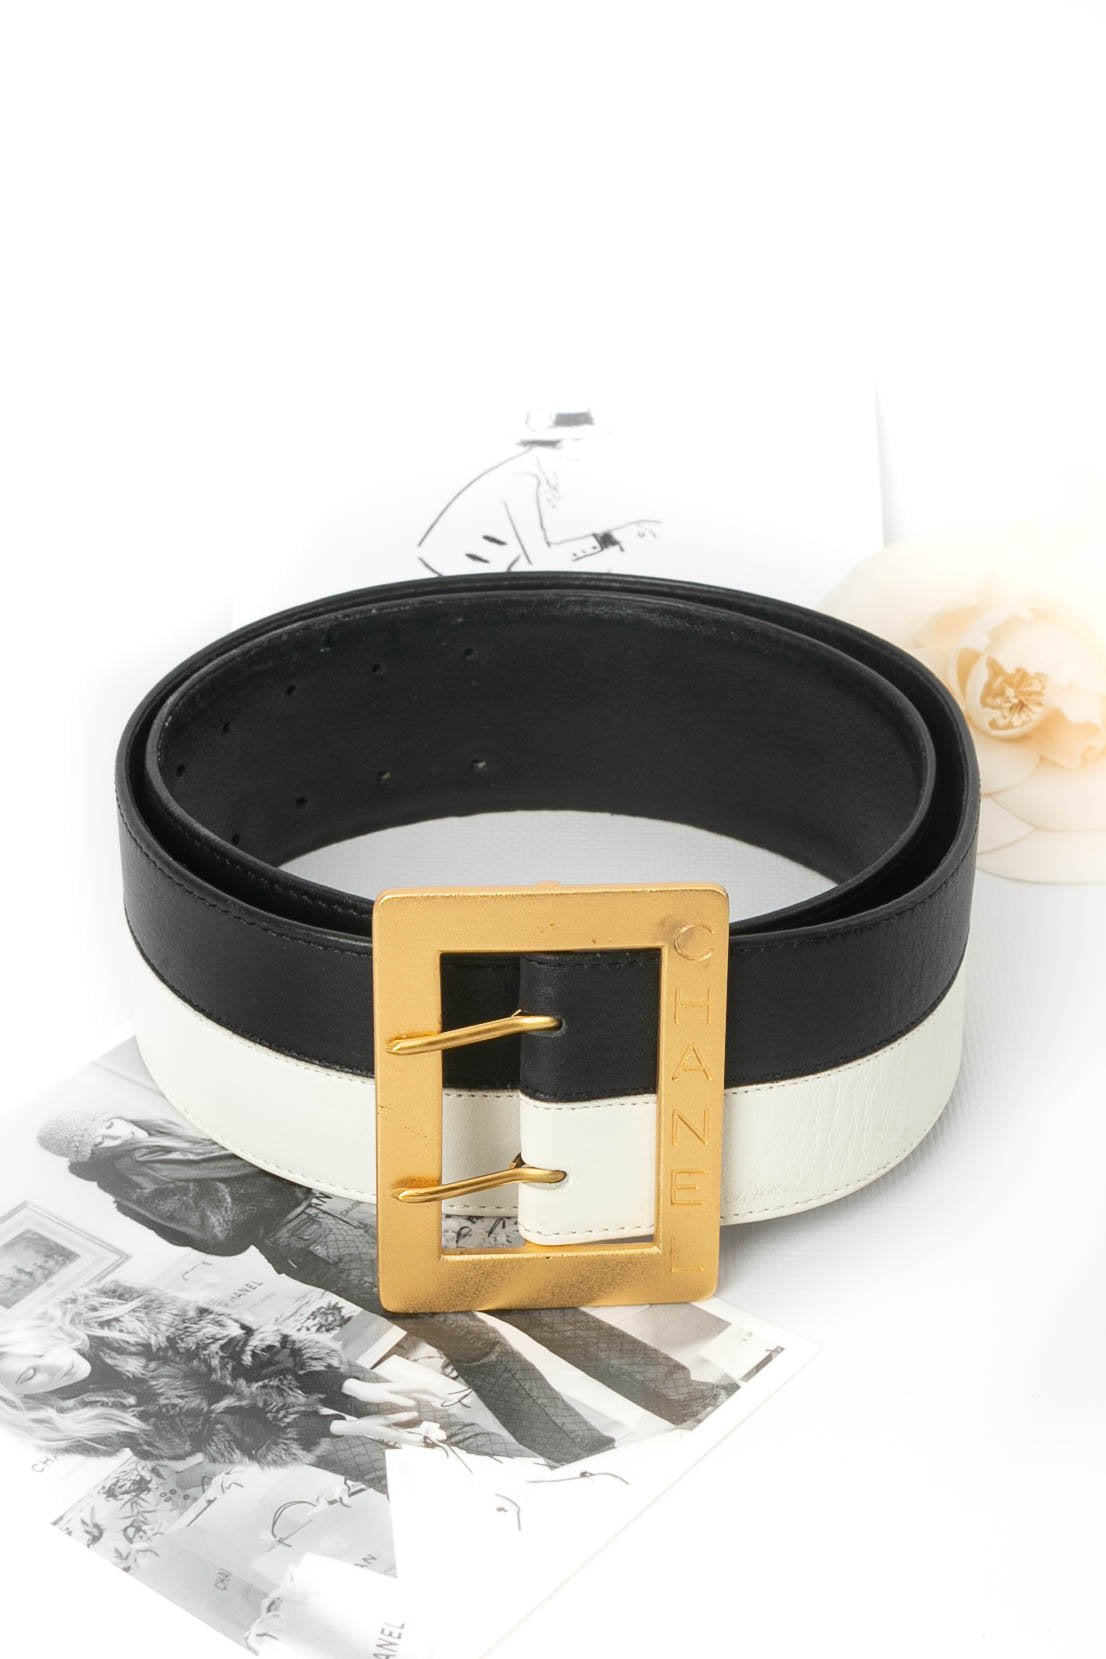 Chanel black and white leather belt